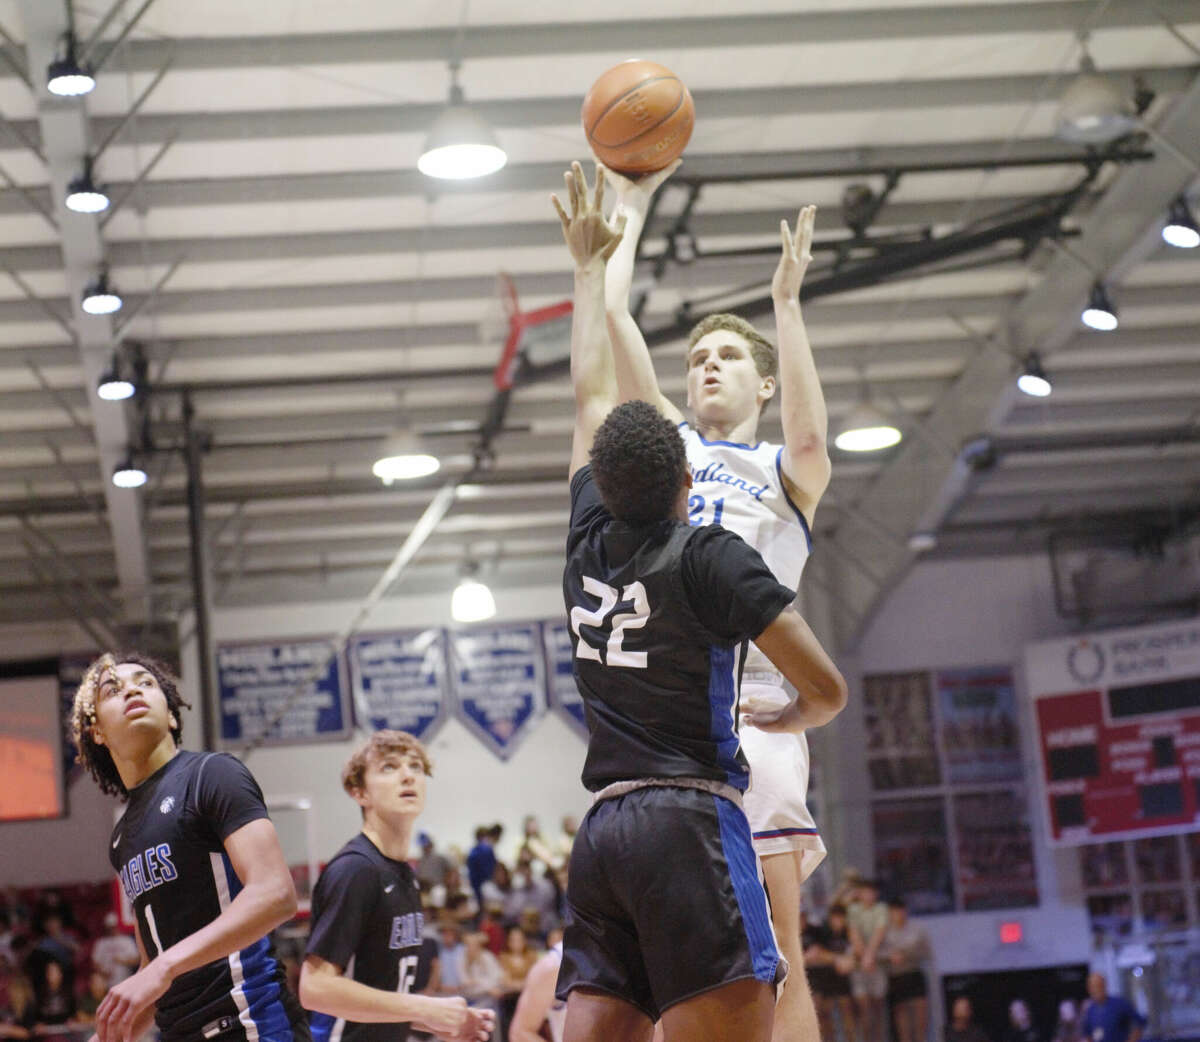 Midland Christian's Josiah Wray makes a turnaround shot over Fort Worth Southwest Christian's Jacoby August during a TAPPS 1-5A boys basketball game, Jan. 10 at McGraw Event Center. 